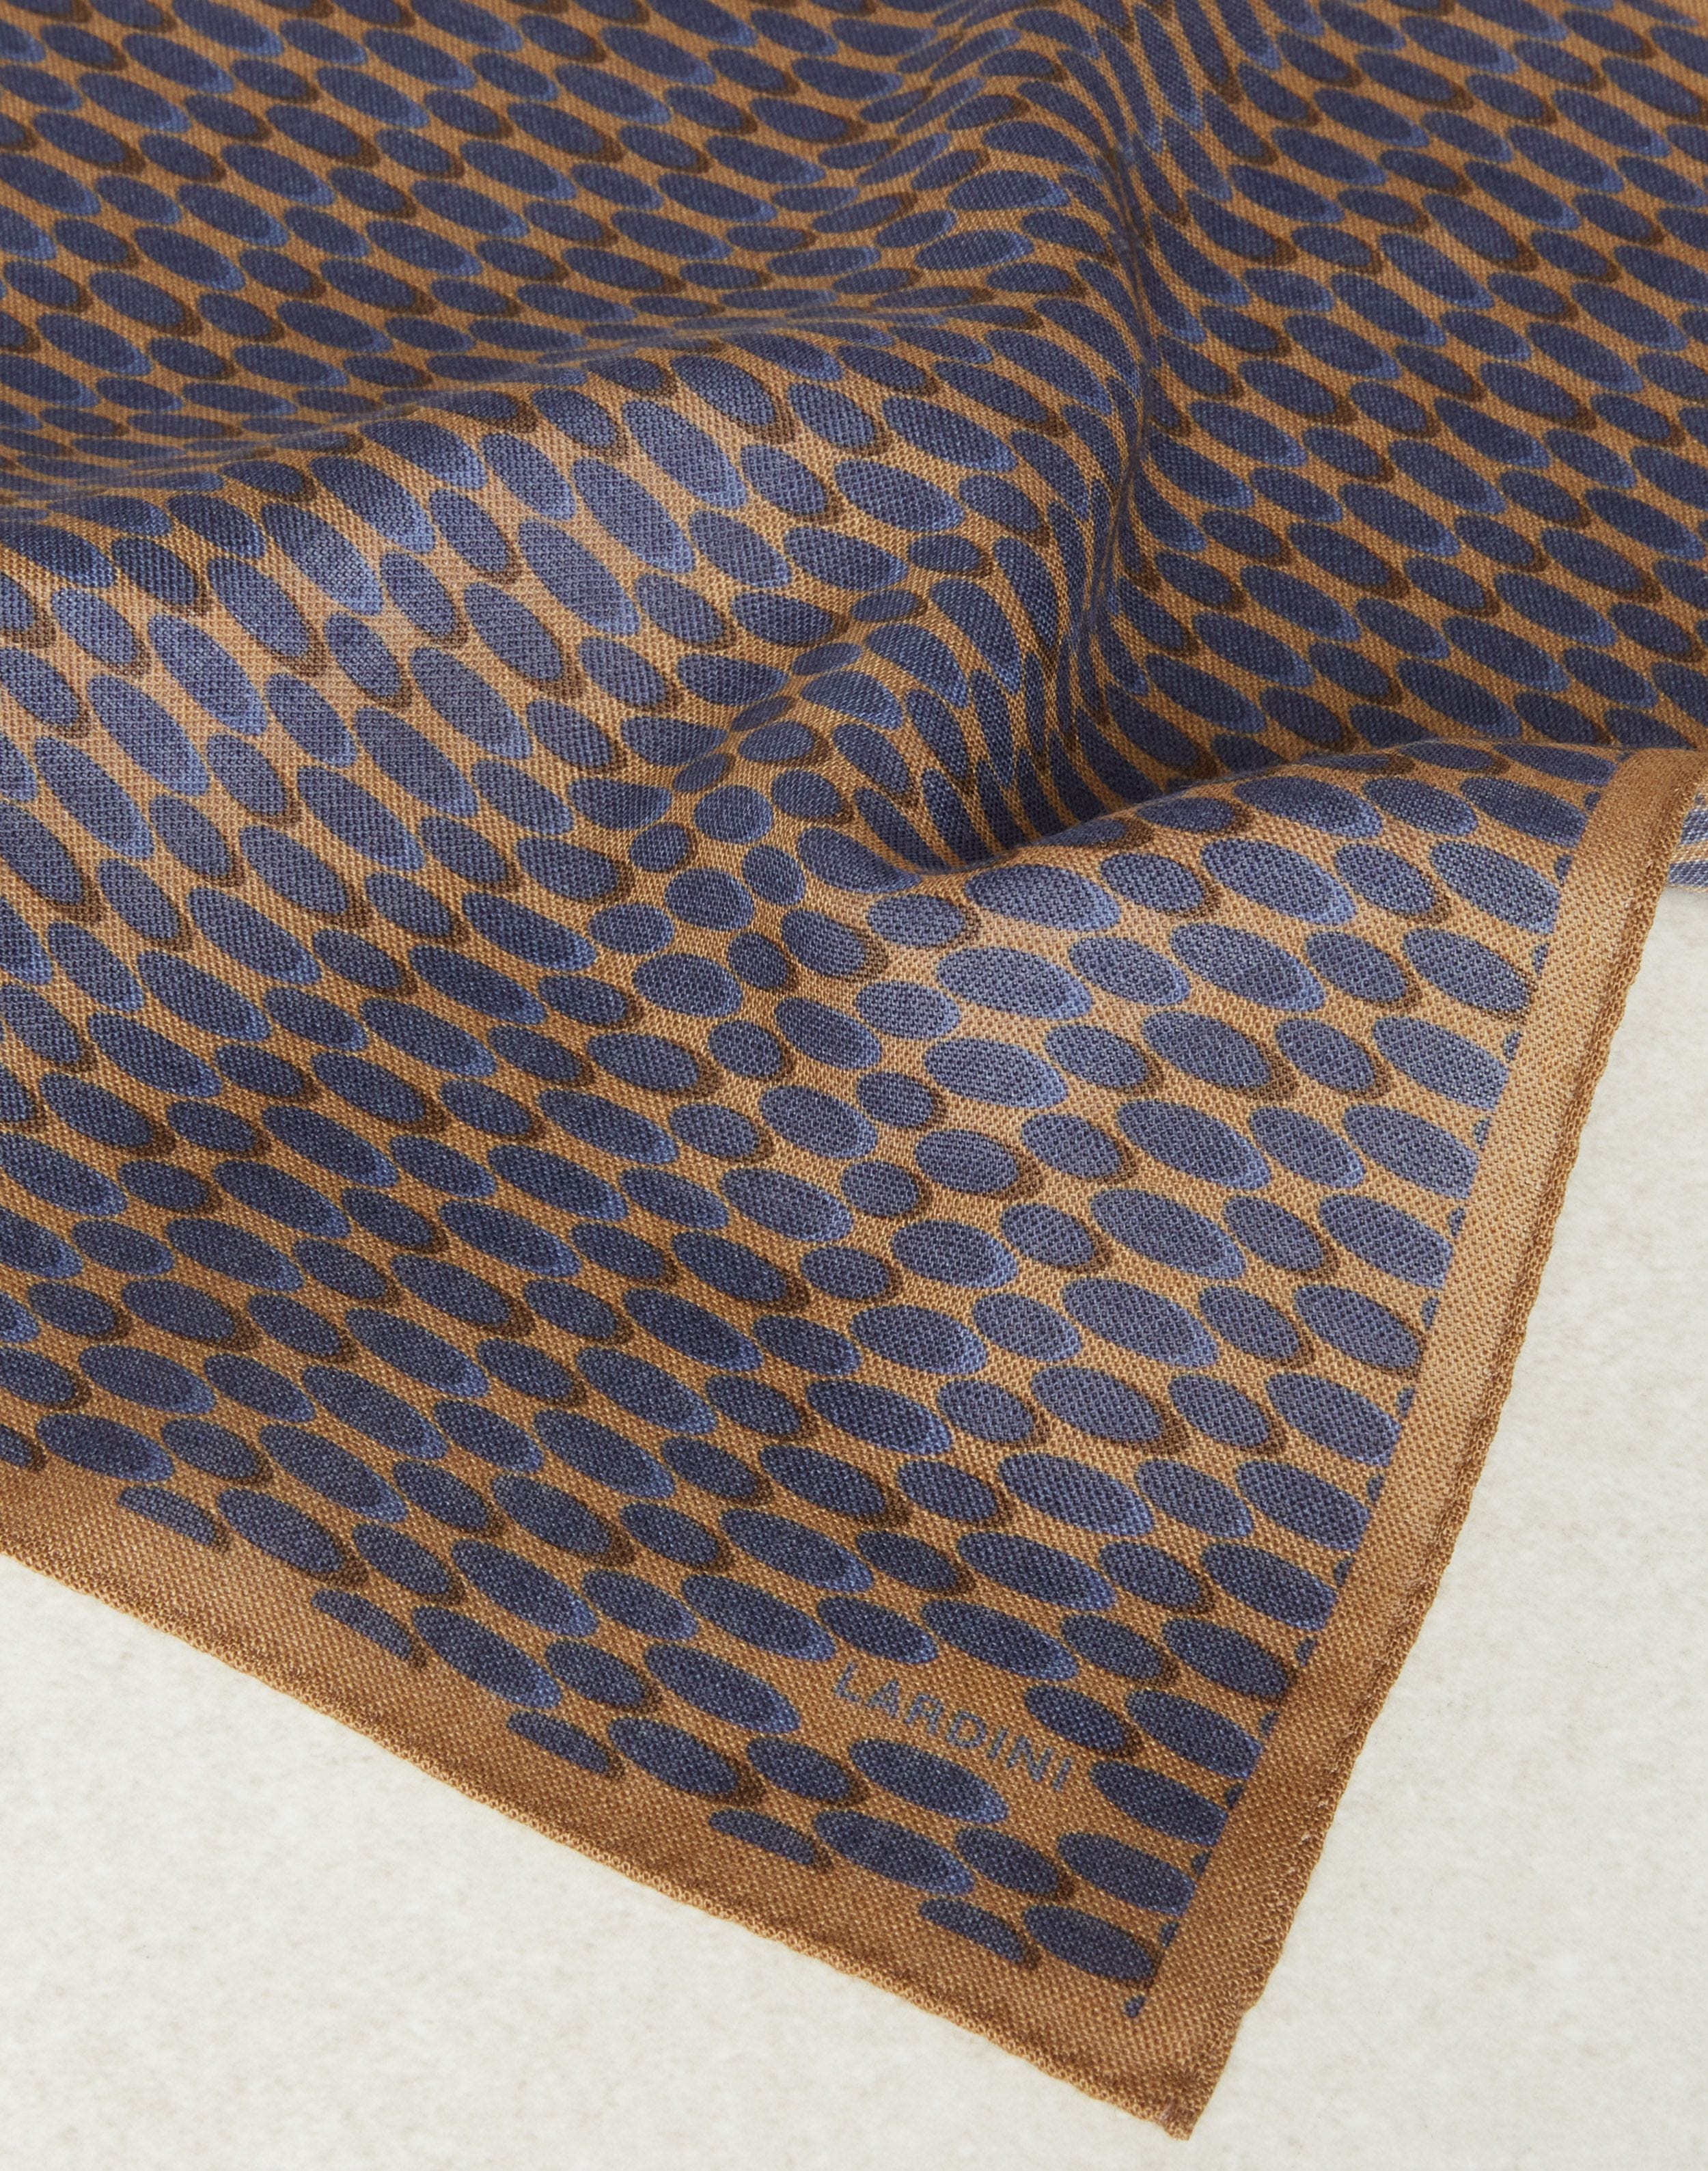 Beige and blue pocket square with a geometrical pattern